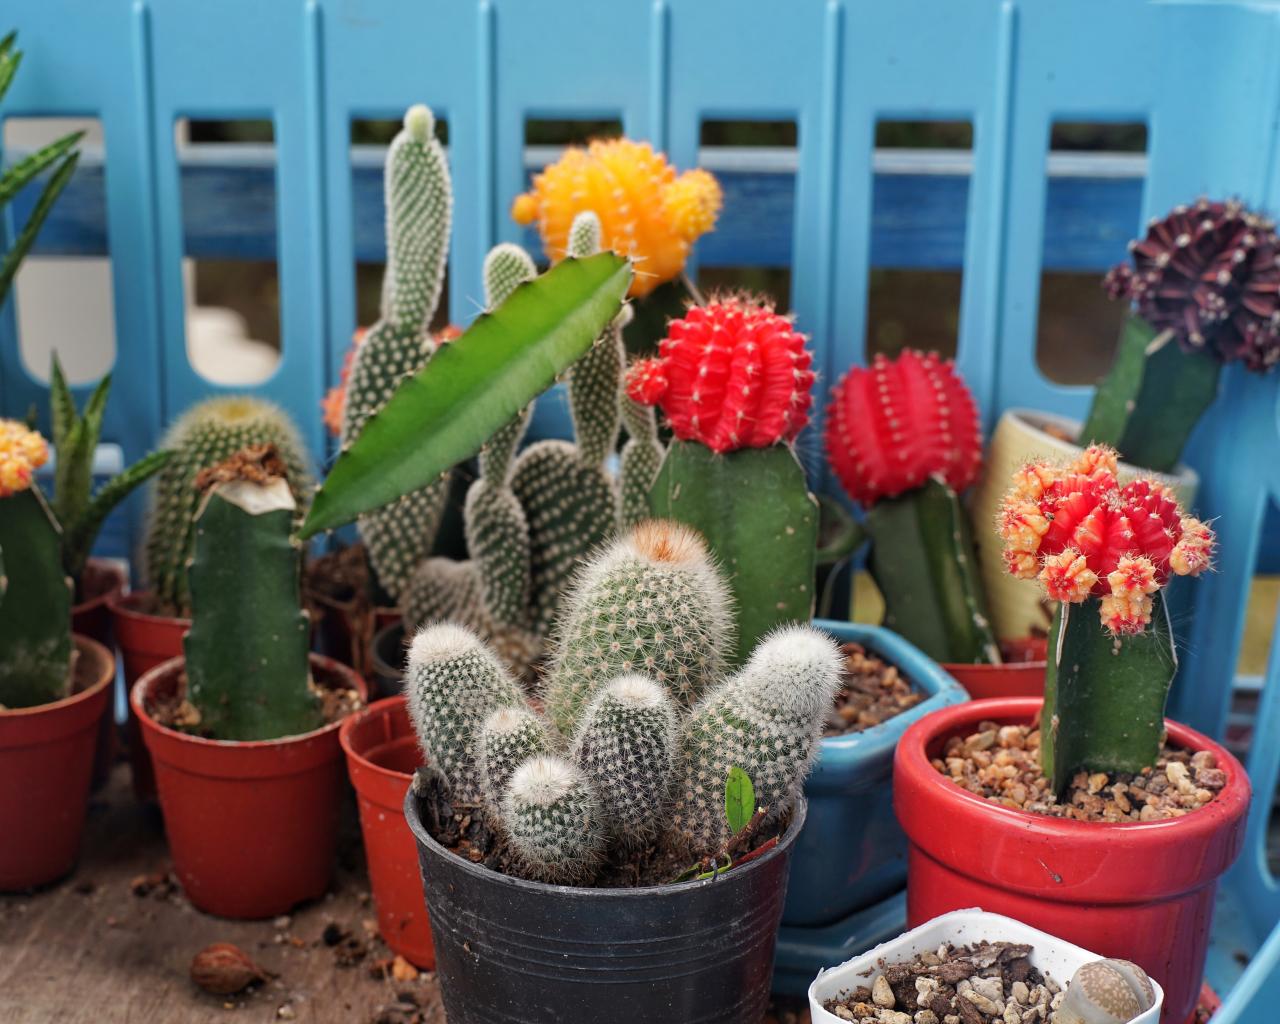 How To Take Care Of A Cactus With/deco Flower How to Plant a Cactus Container Garden | HGTV